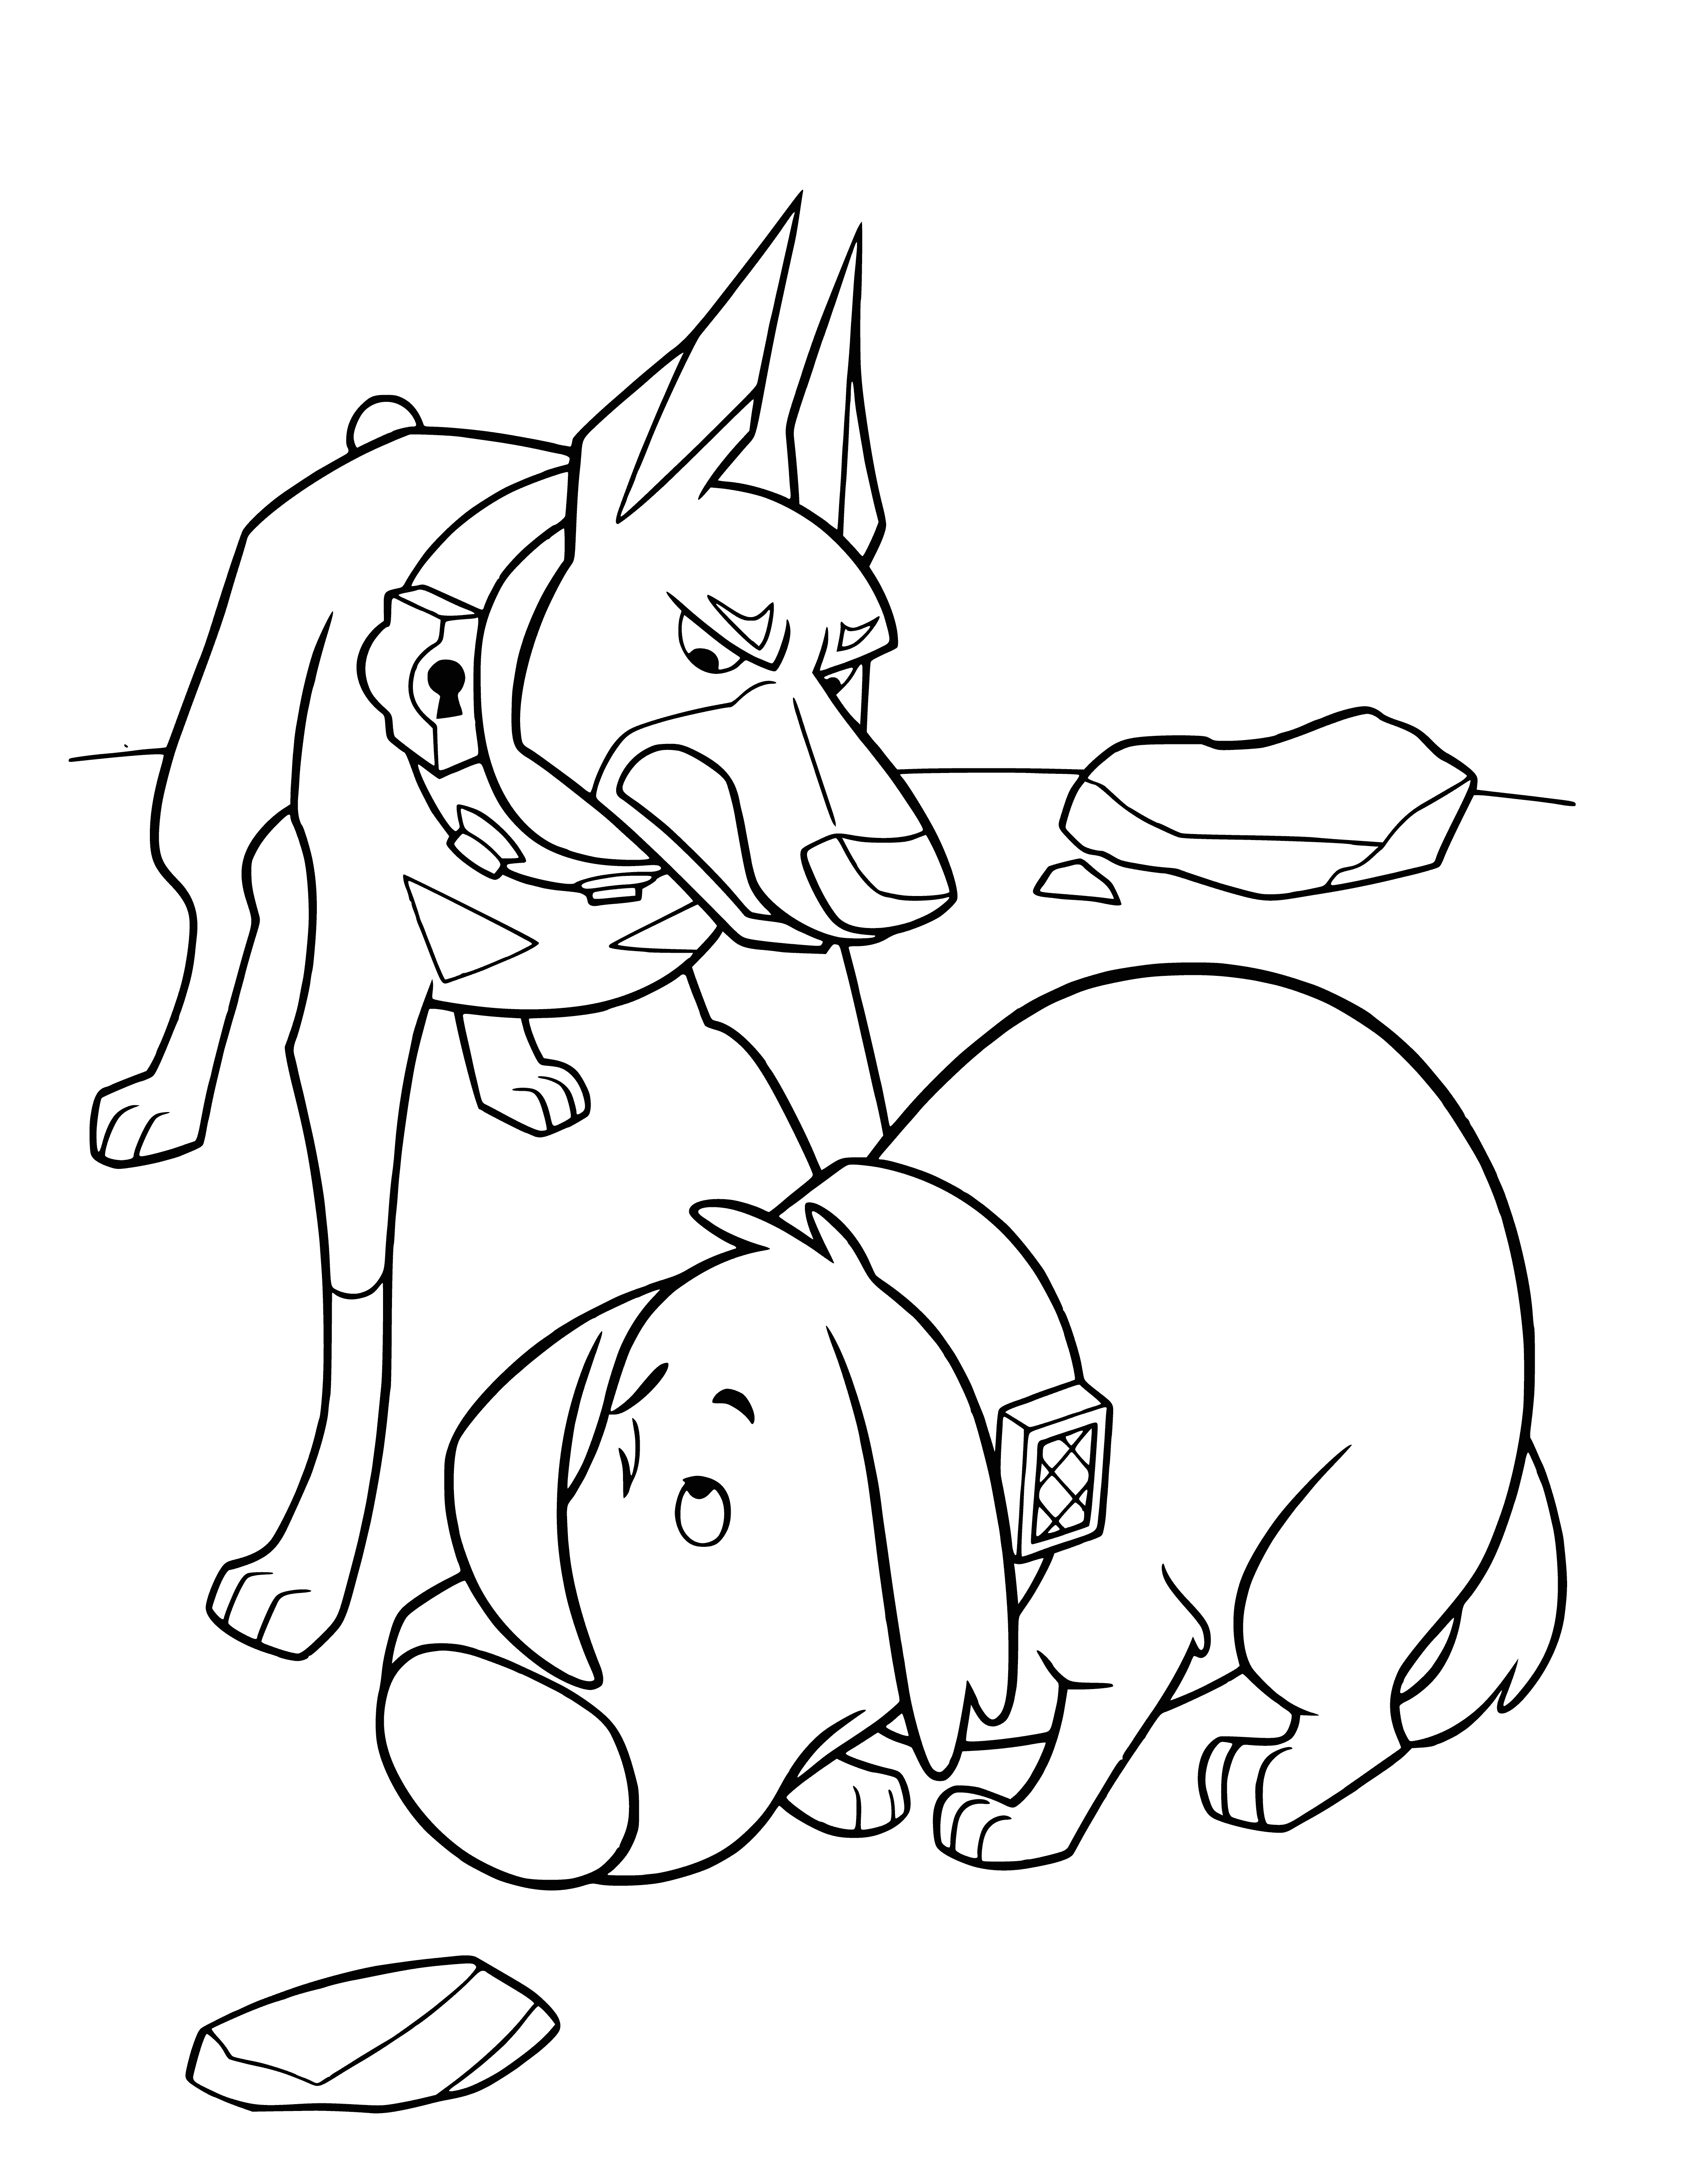 coloring page: Doug, caught chewin' shoes, gets scolded & shamed by his owner.